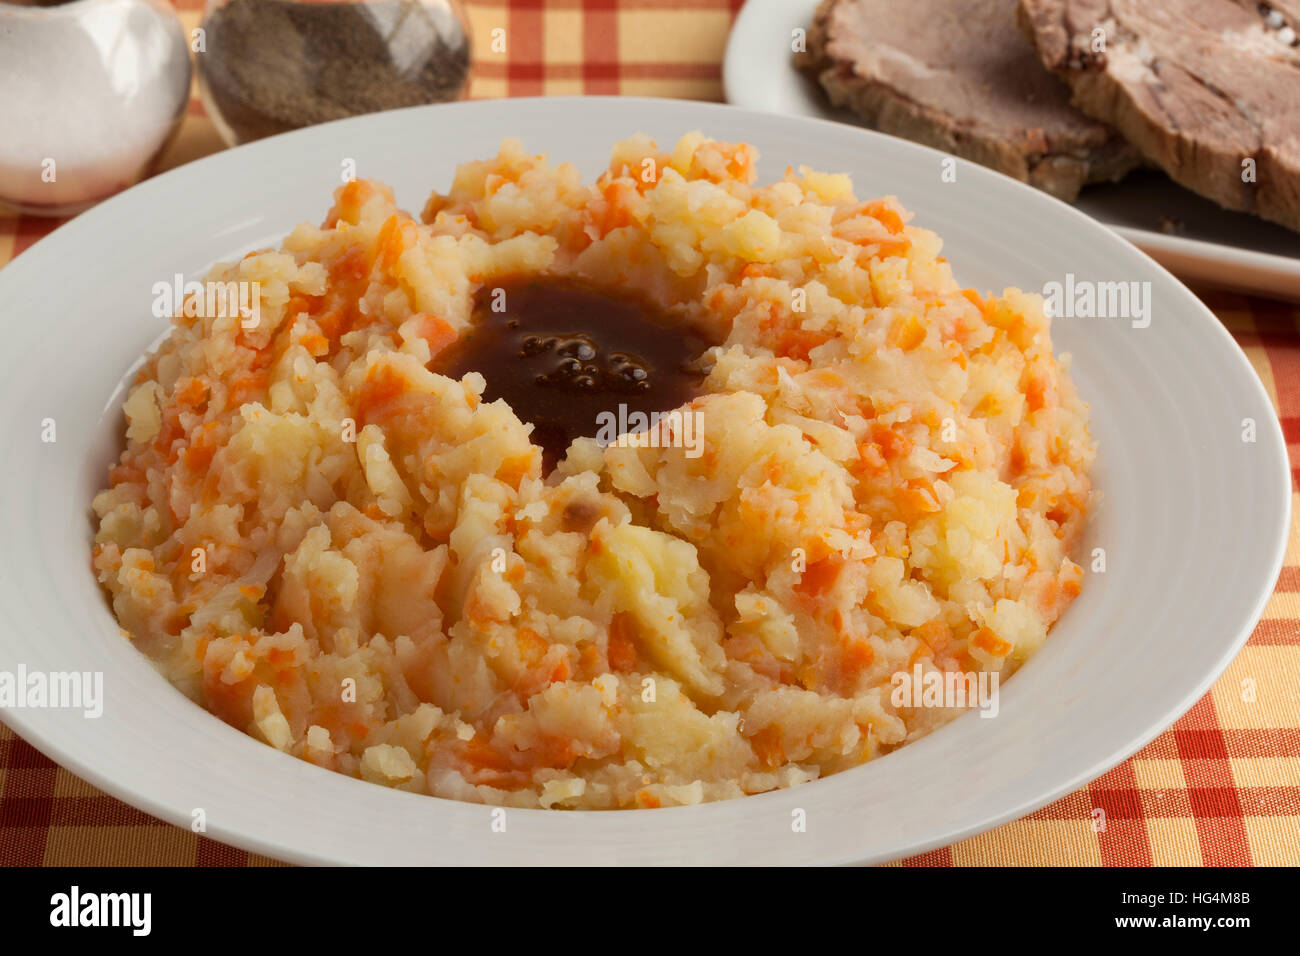 Dish with traditional dutch stew, meat and gravy Stock Photo